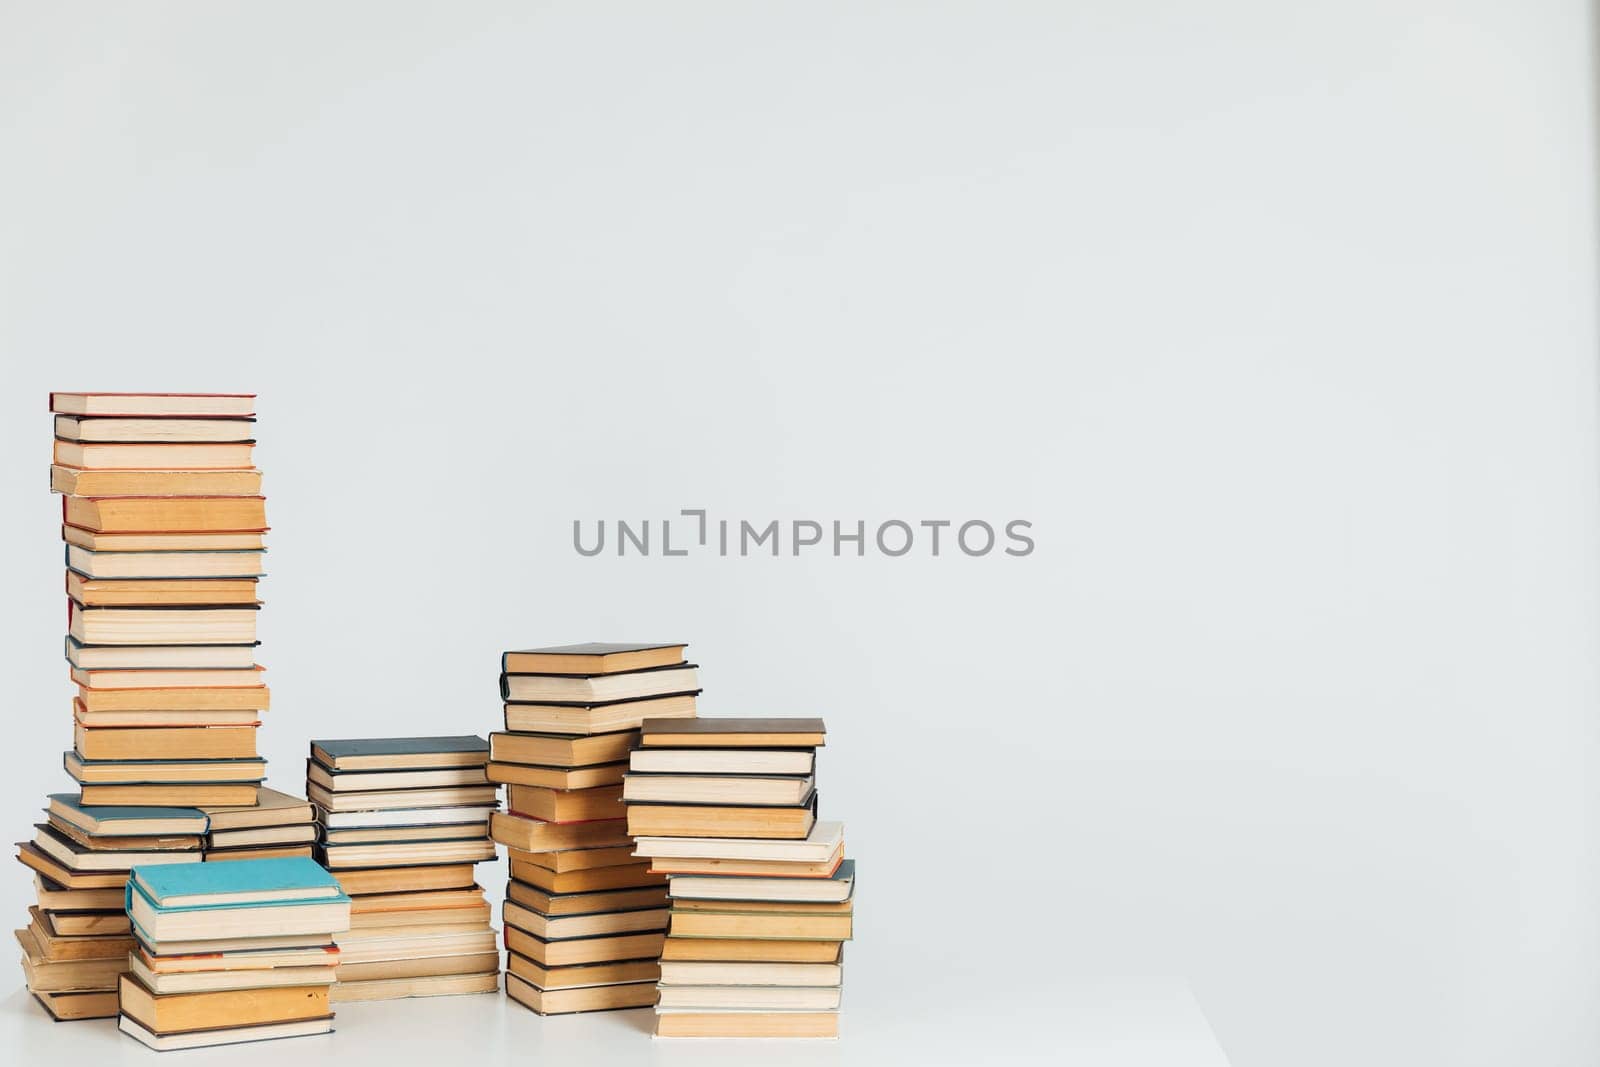 Stacks of educational books in university library on white background by Simakov